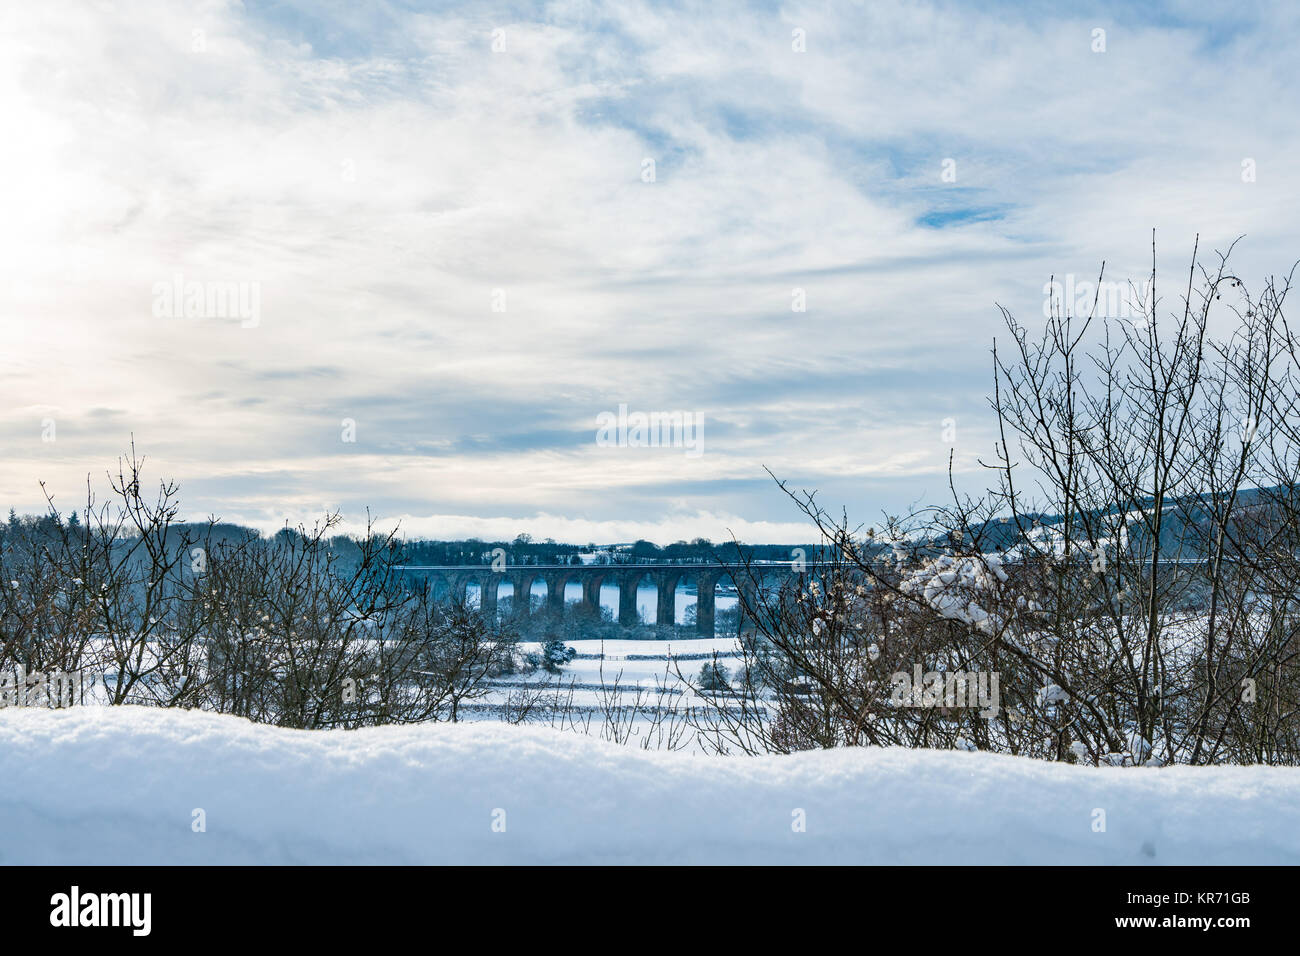 Railway viaduct near Chirk in Wales with snow Stock Photo